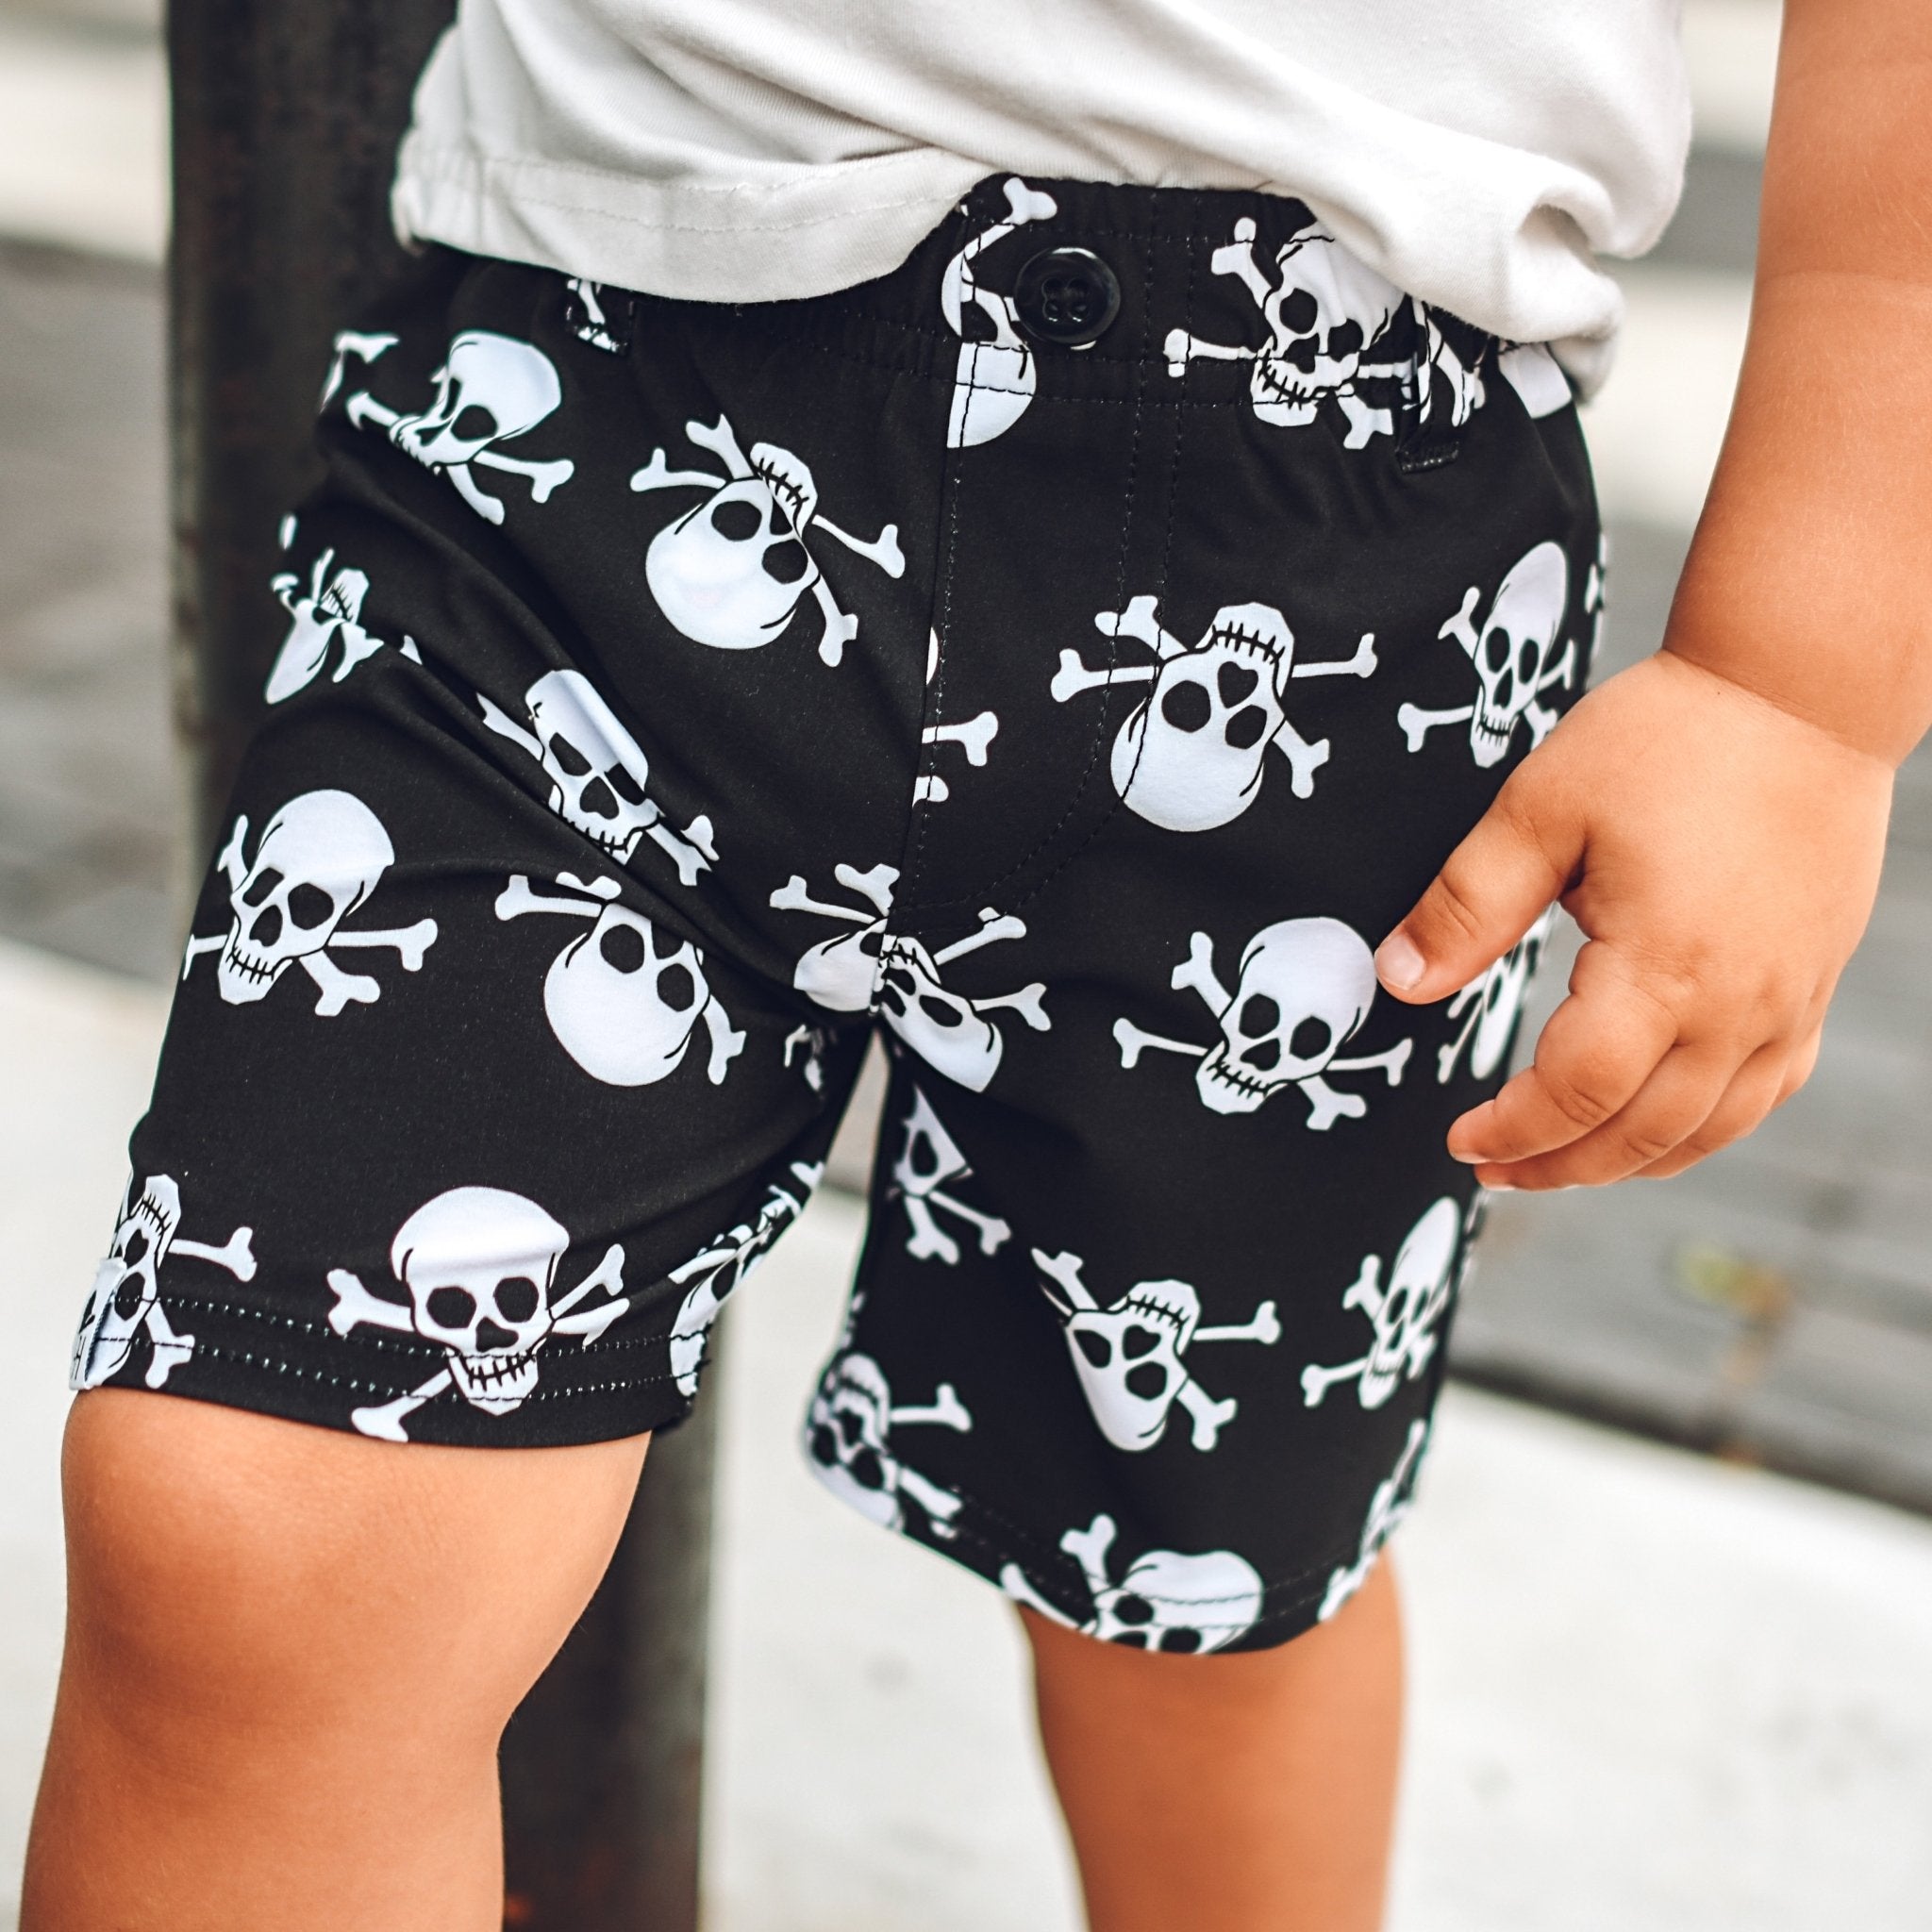 Close up image of boy's shorts with black background and white skull print -Skull Walk Shorts - George Hats